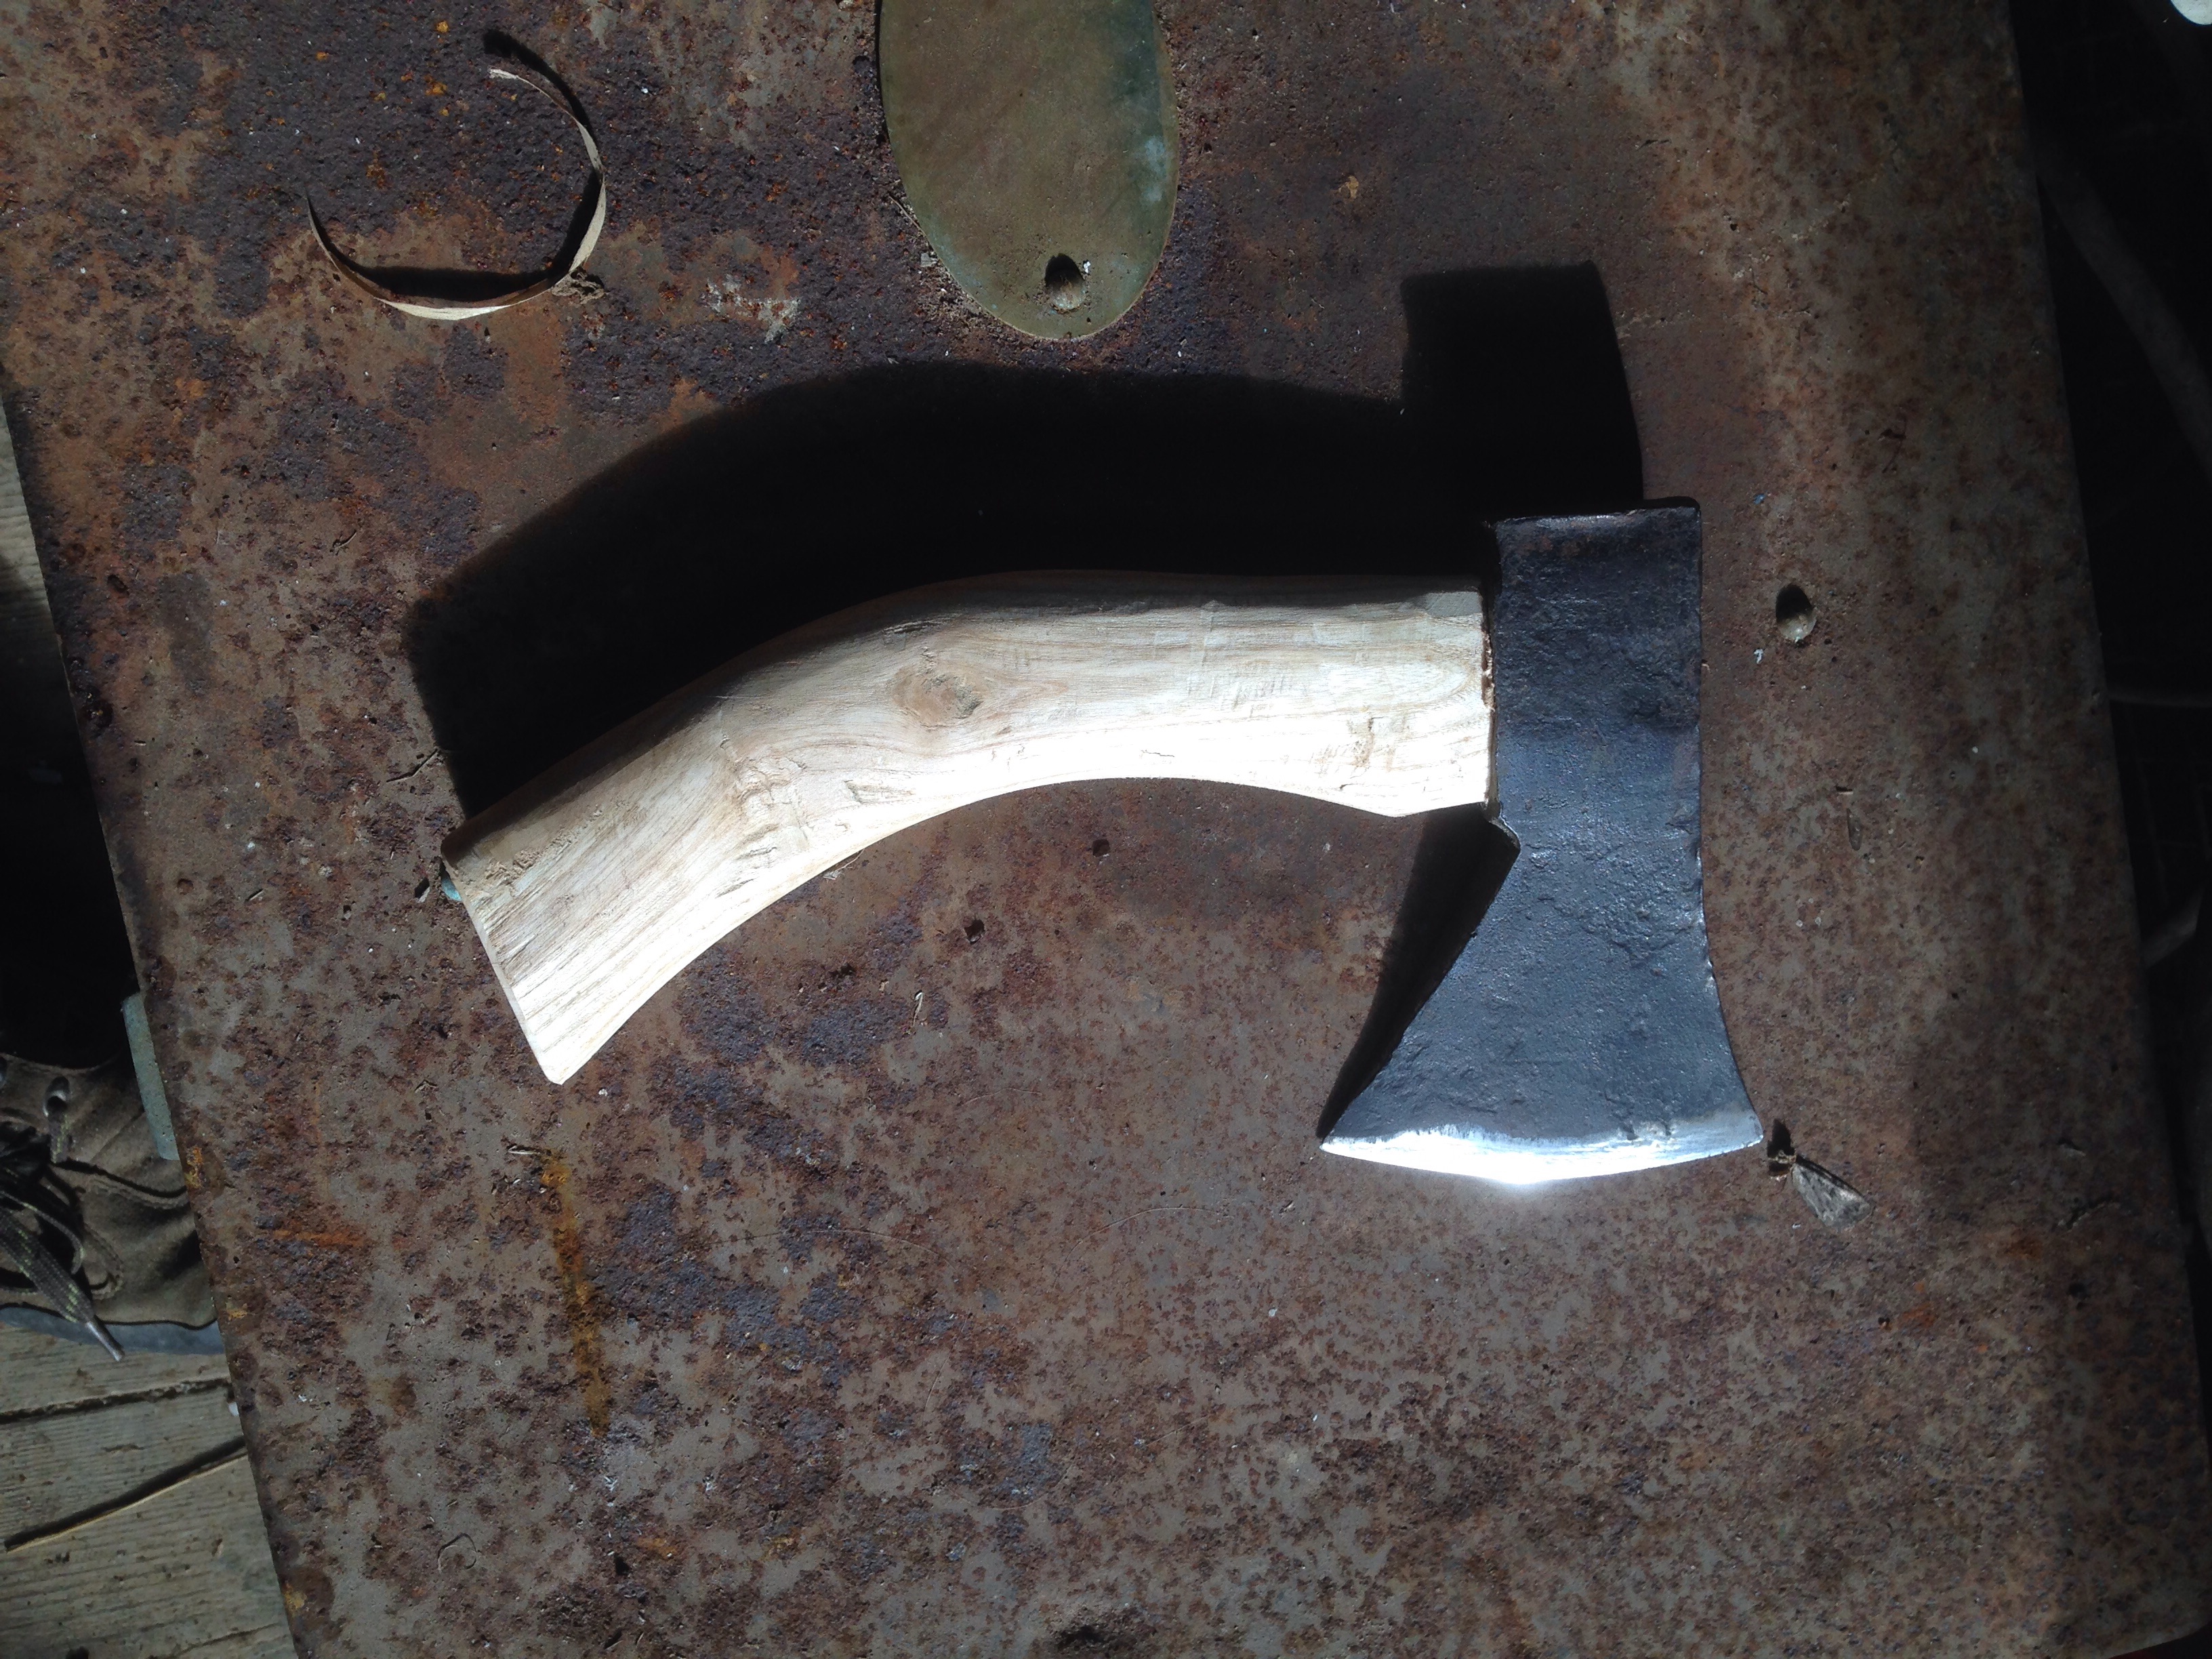 A new handle roughed out ready for finishing.